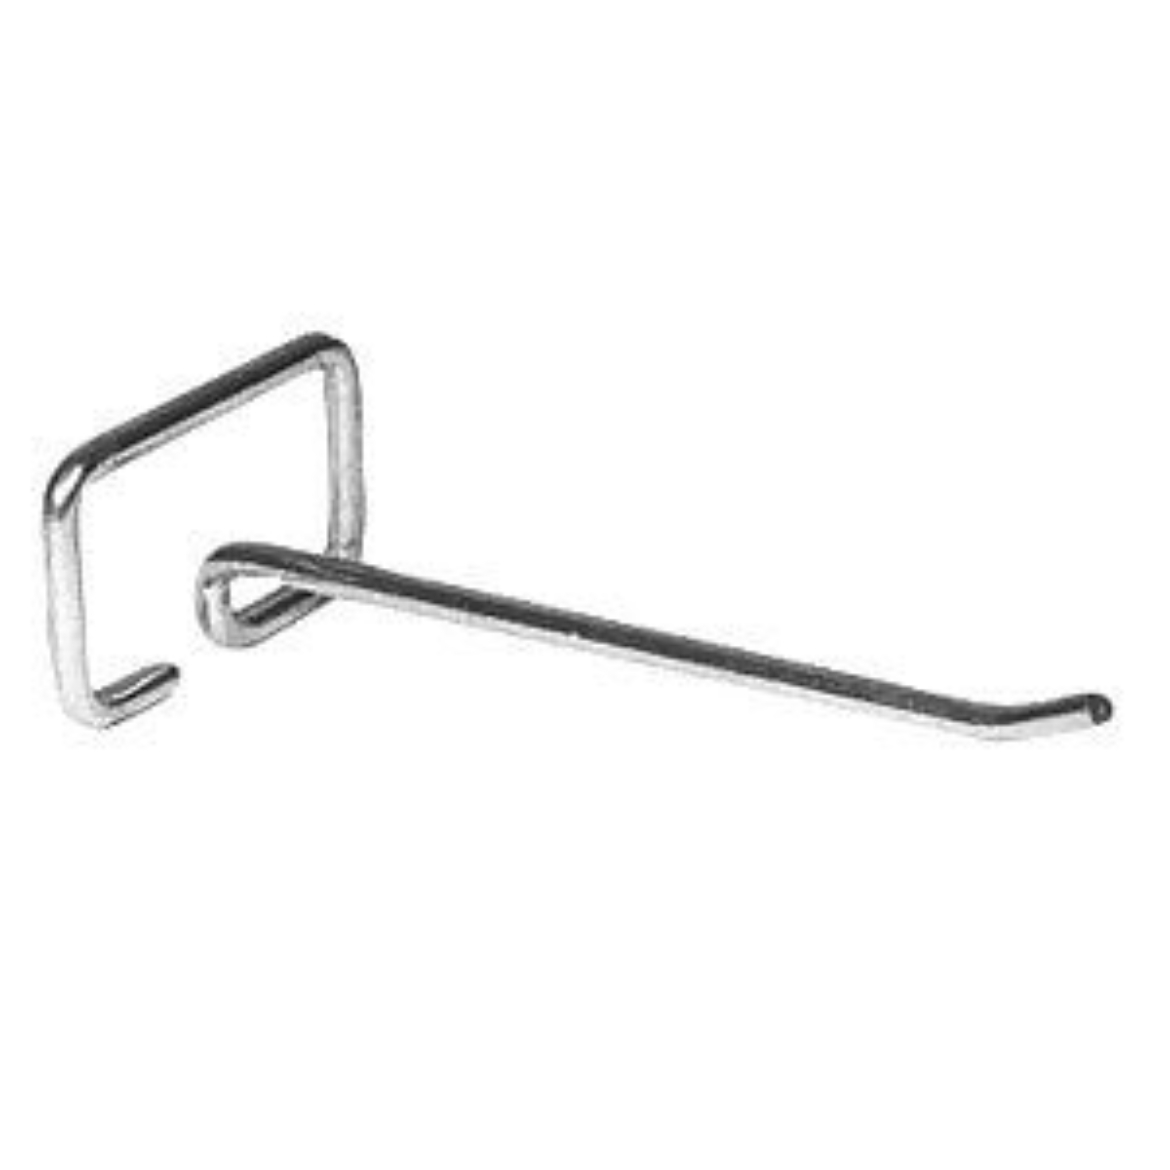 Picture of Louvre Panel Hook S6 Single Prong - 152mm Long - Capacity 2.3kg